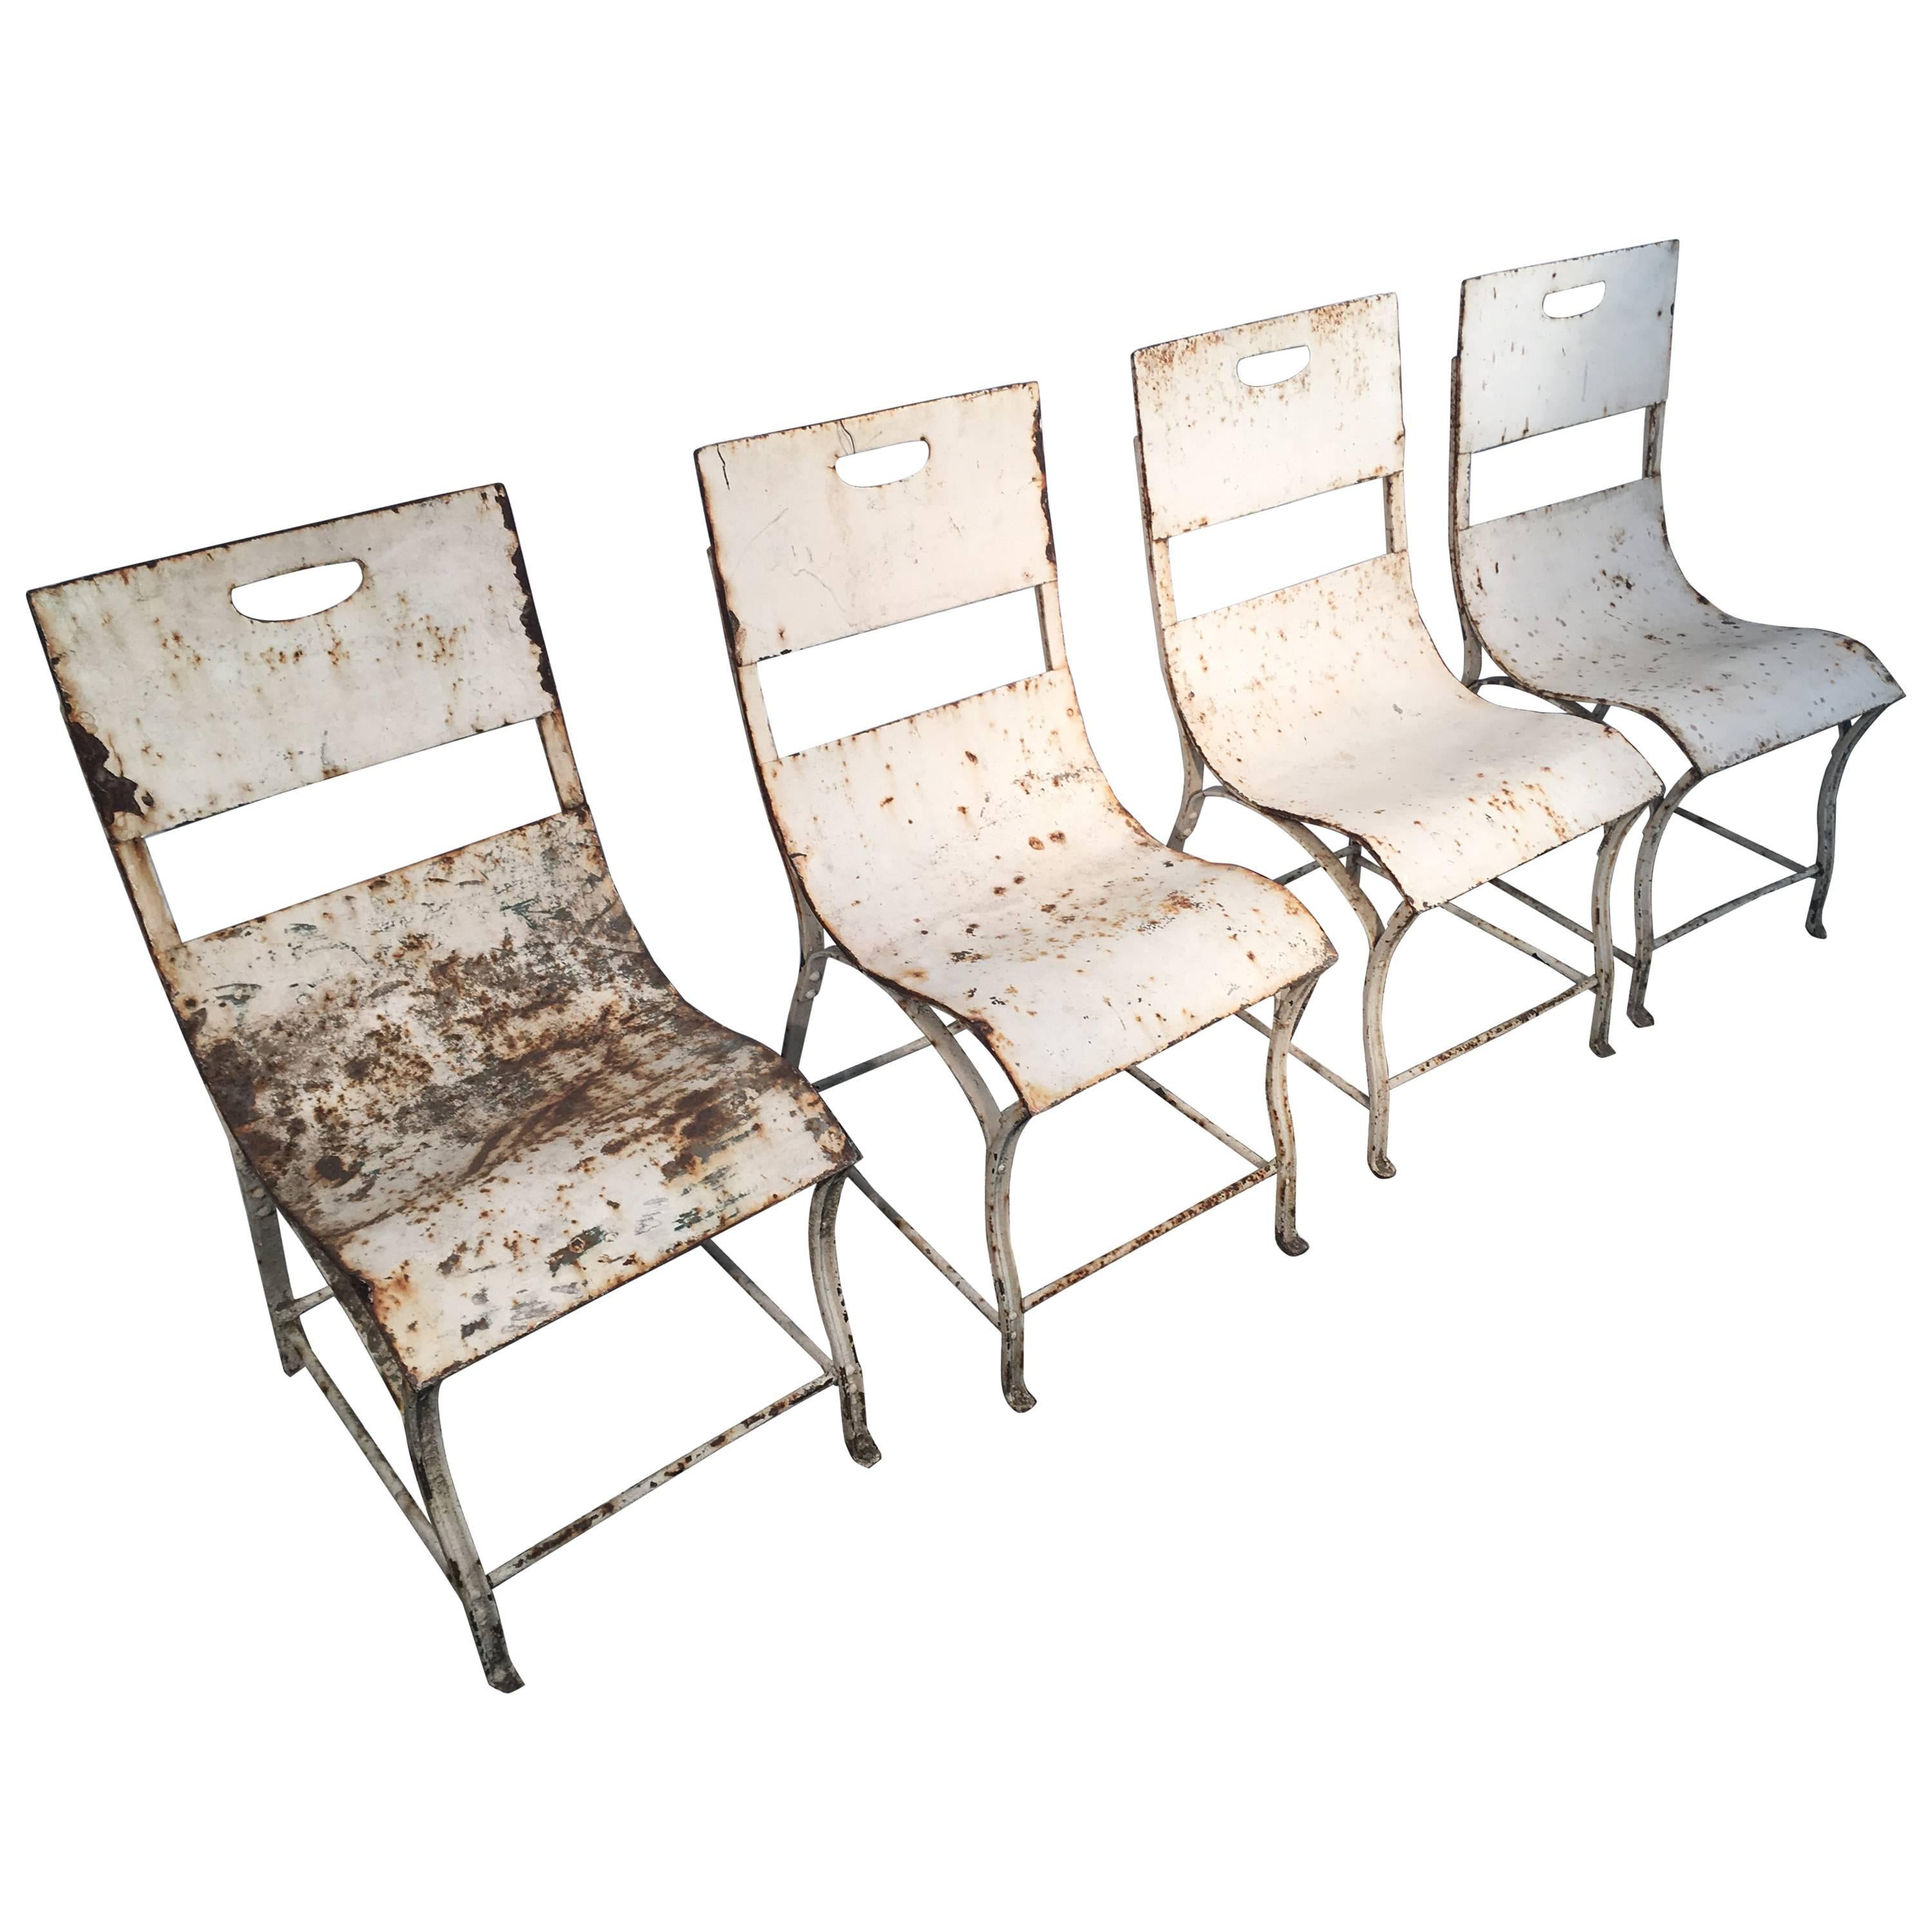 Set of Four French Painted Steel Garden Chairs